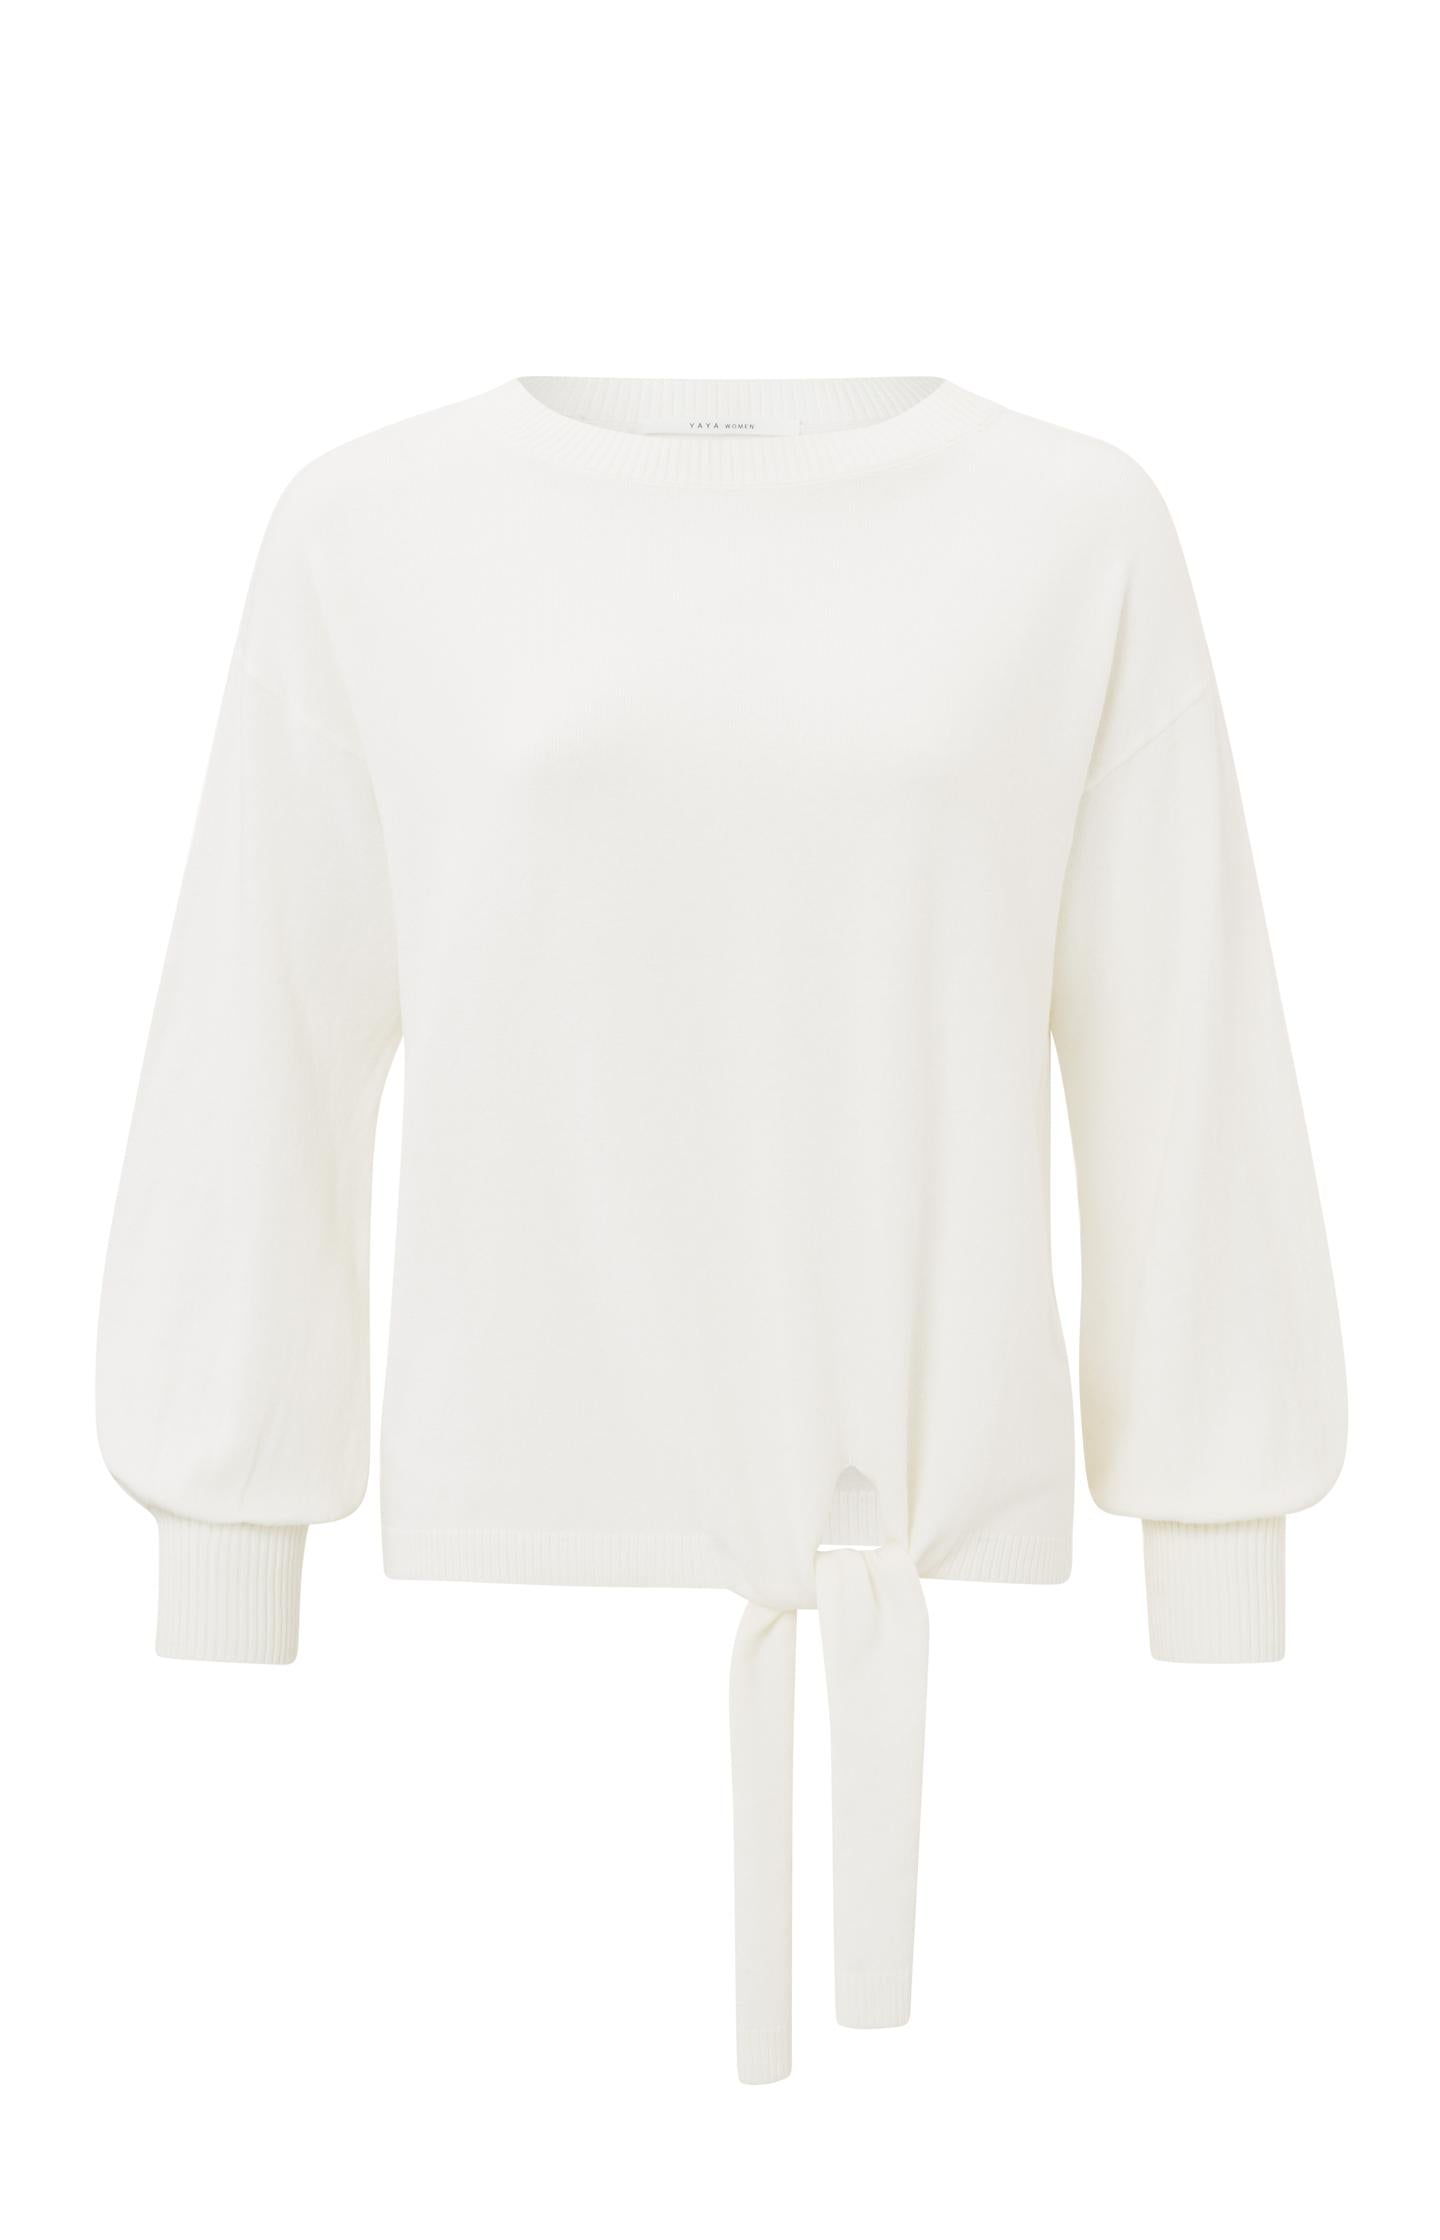 Sweater with boatneck, long balloon sleeves and knot - Type: product